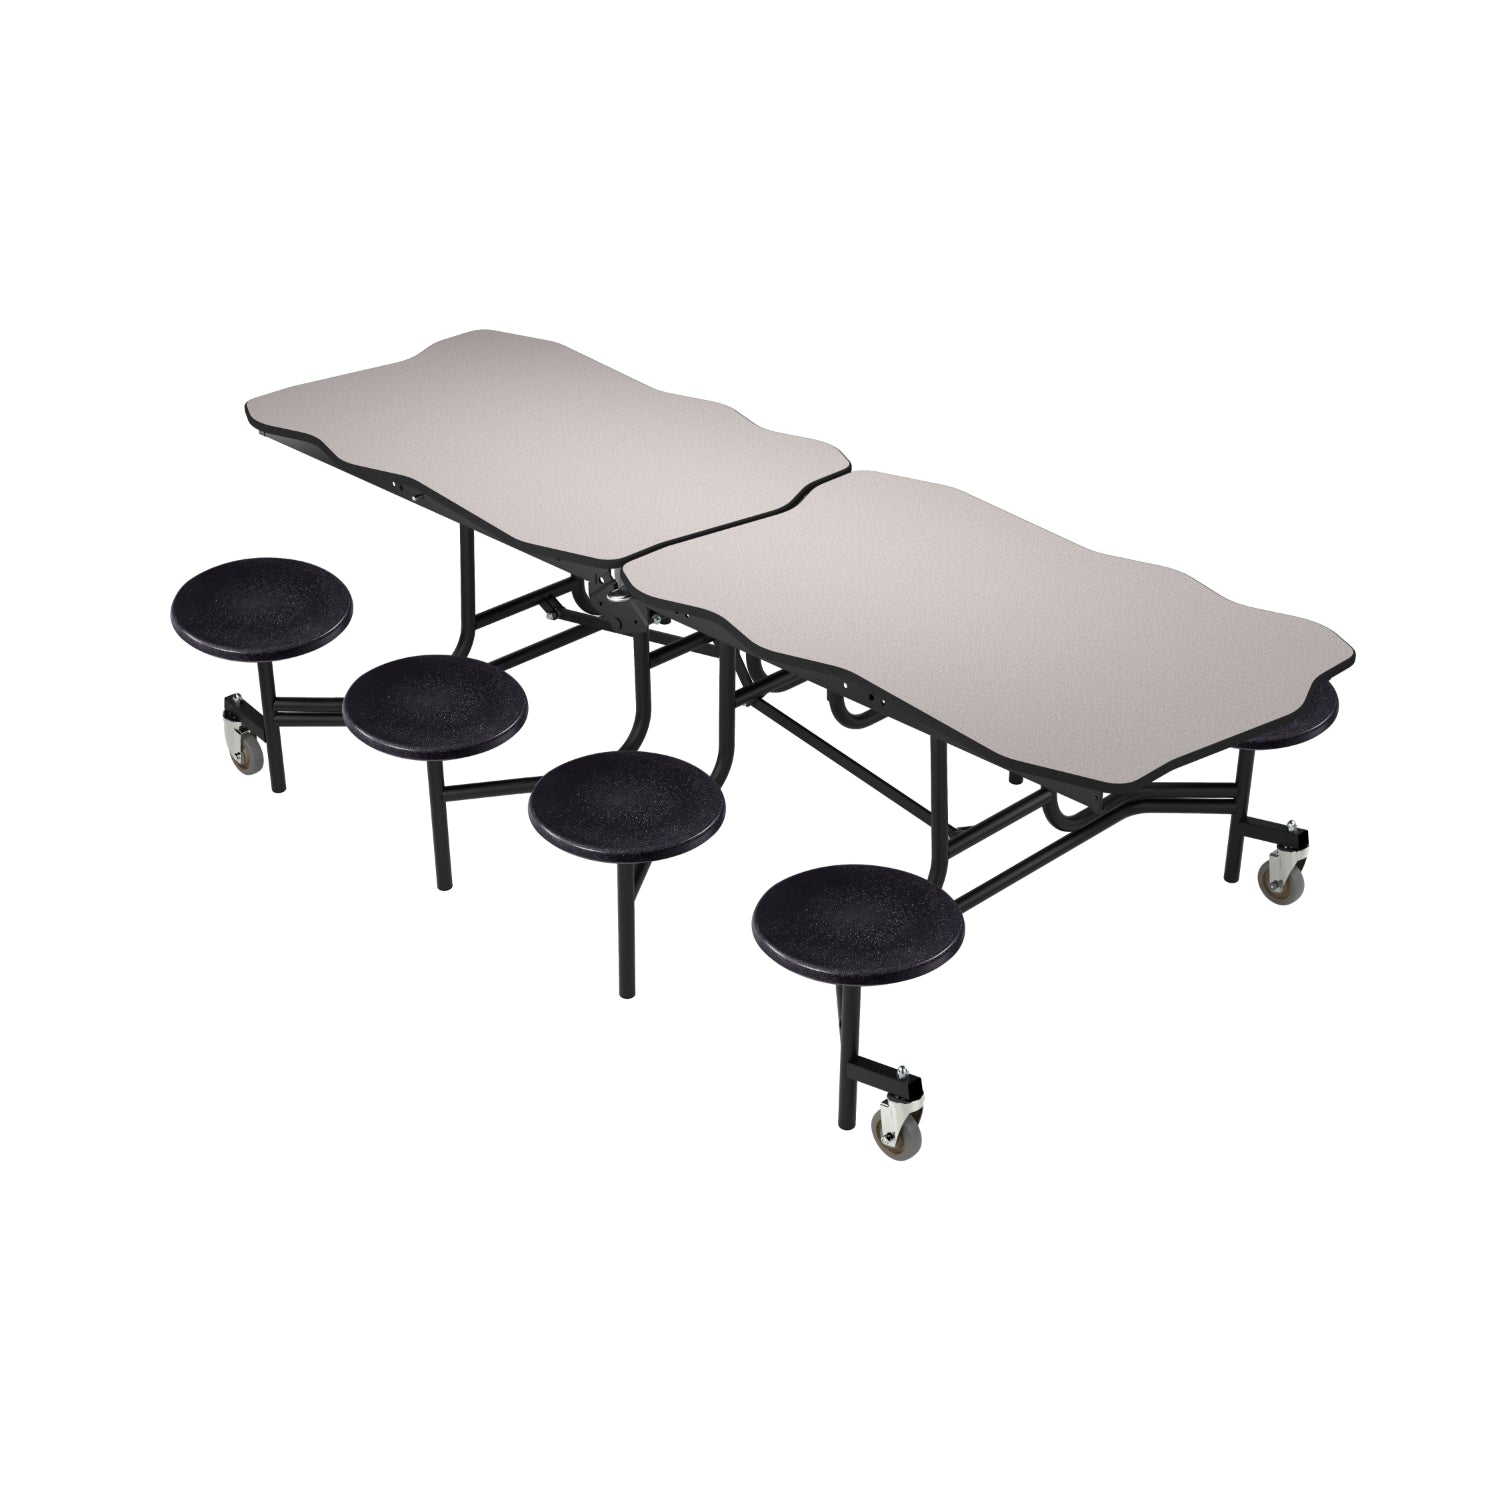 Mobile Cafeteria Table with 8 Stools, 8' Bedrock, Plywood Core, Vinyl T-Mold Edge, Textured Black Frame